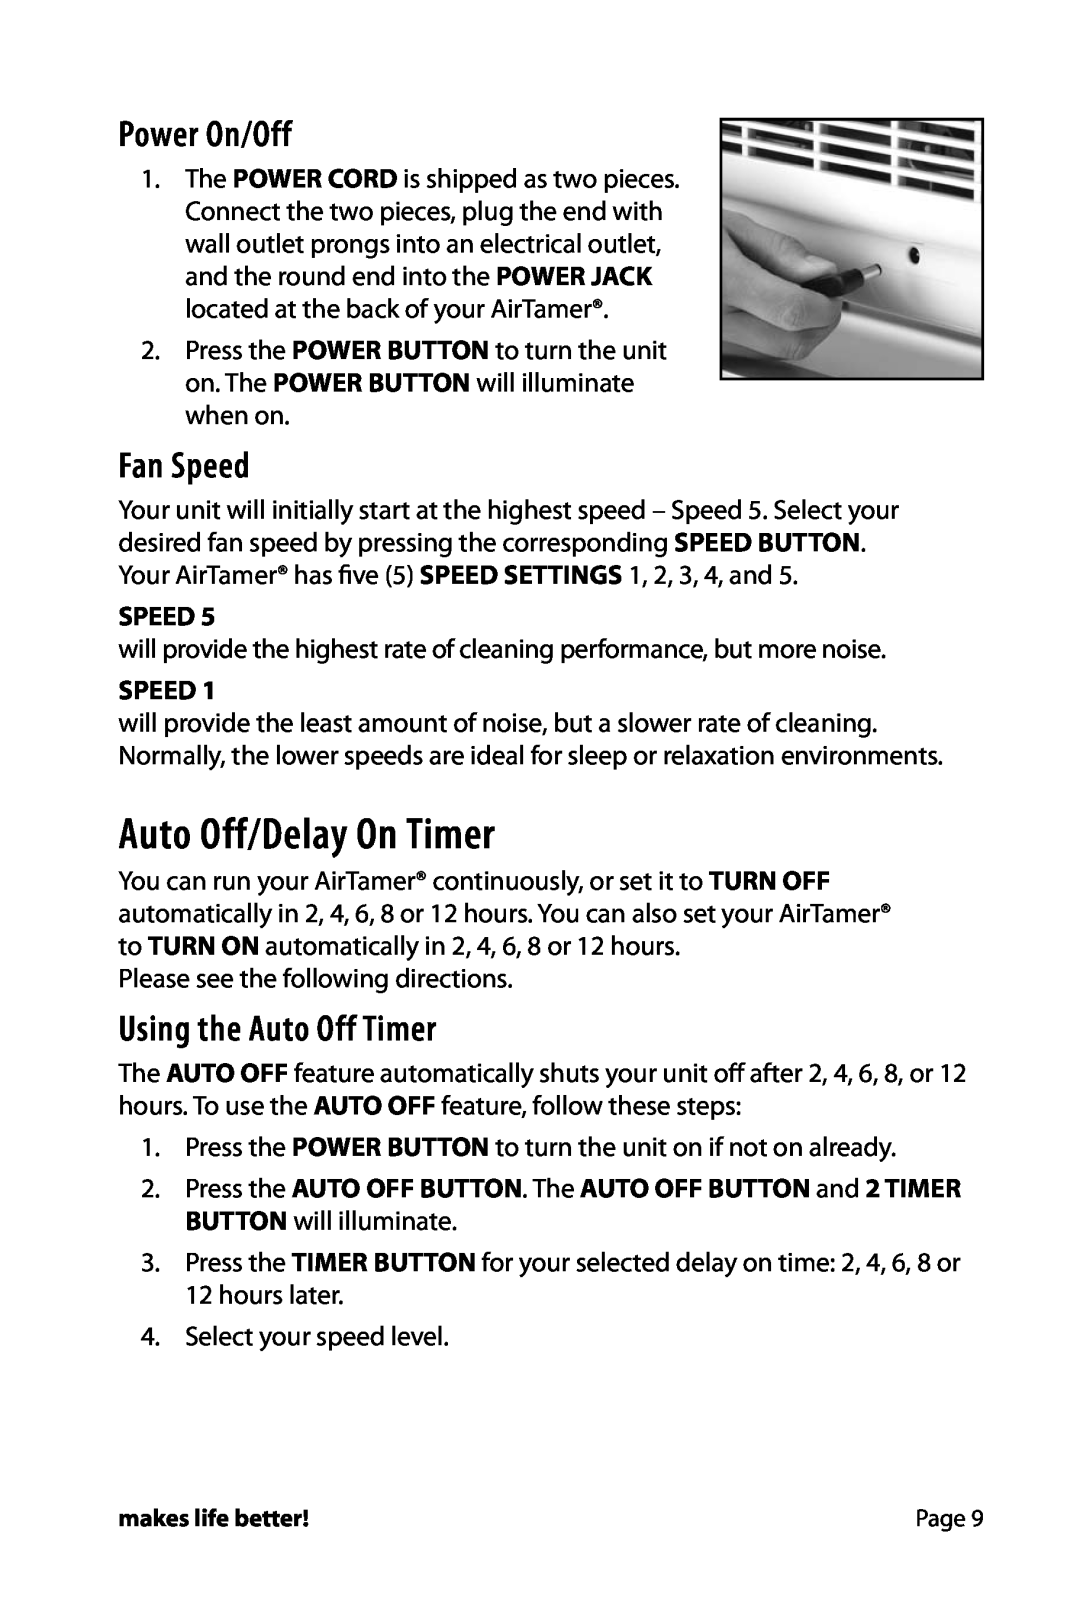 FilterStream HW_A710 instruction manual Auto Off/Delay On Timer, Power On/Off, Fan Speed, Using the Auto Off Timer 